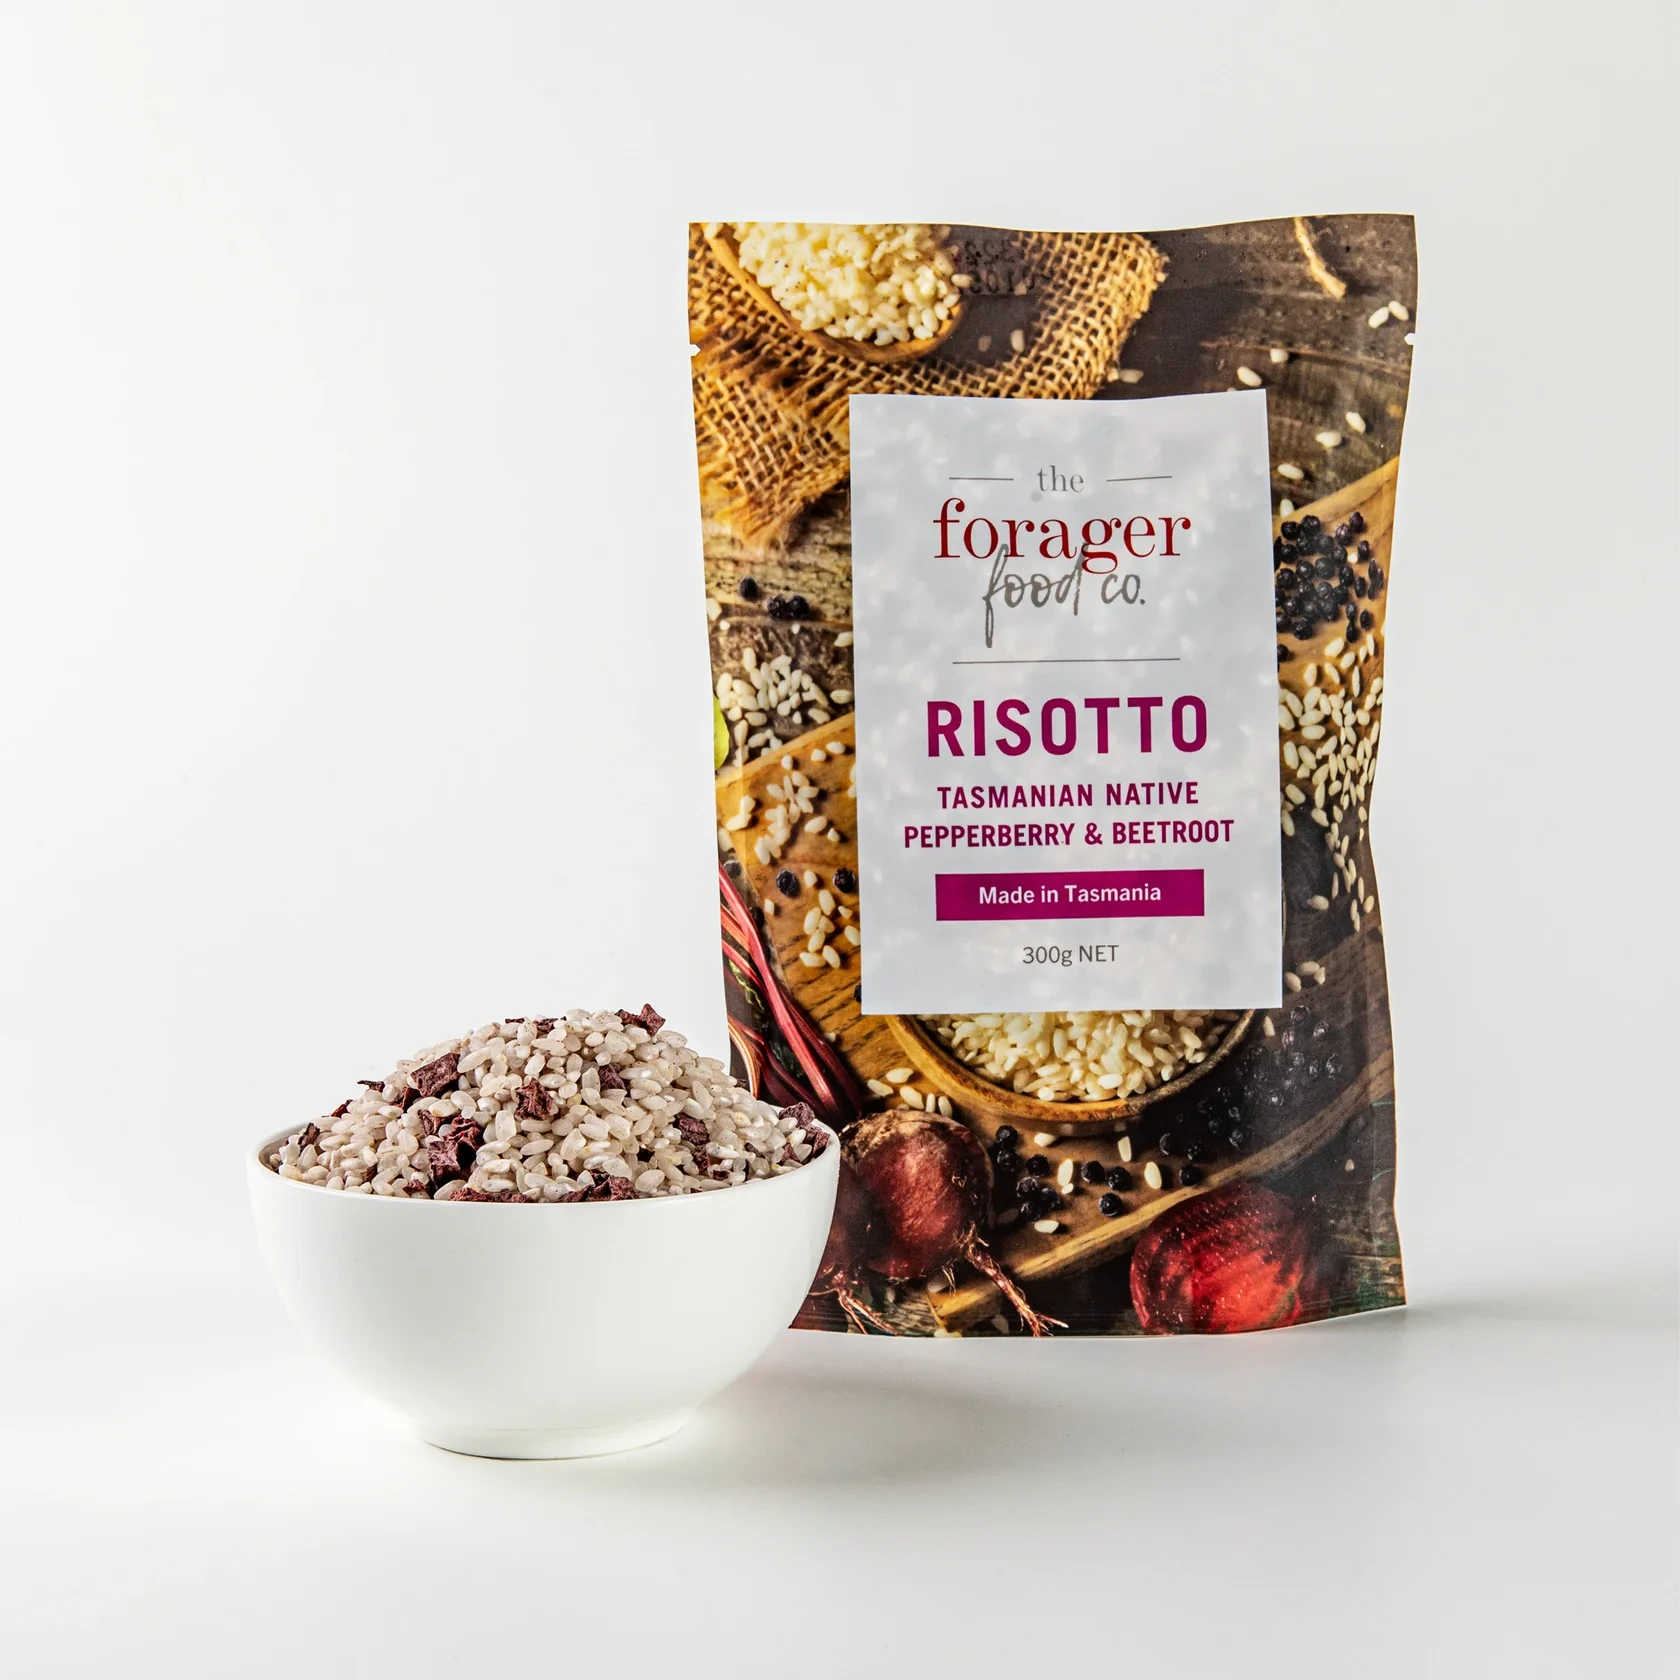 Risotto Rice with Tasmanian Native Pepperberry & Beetroot 300G